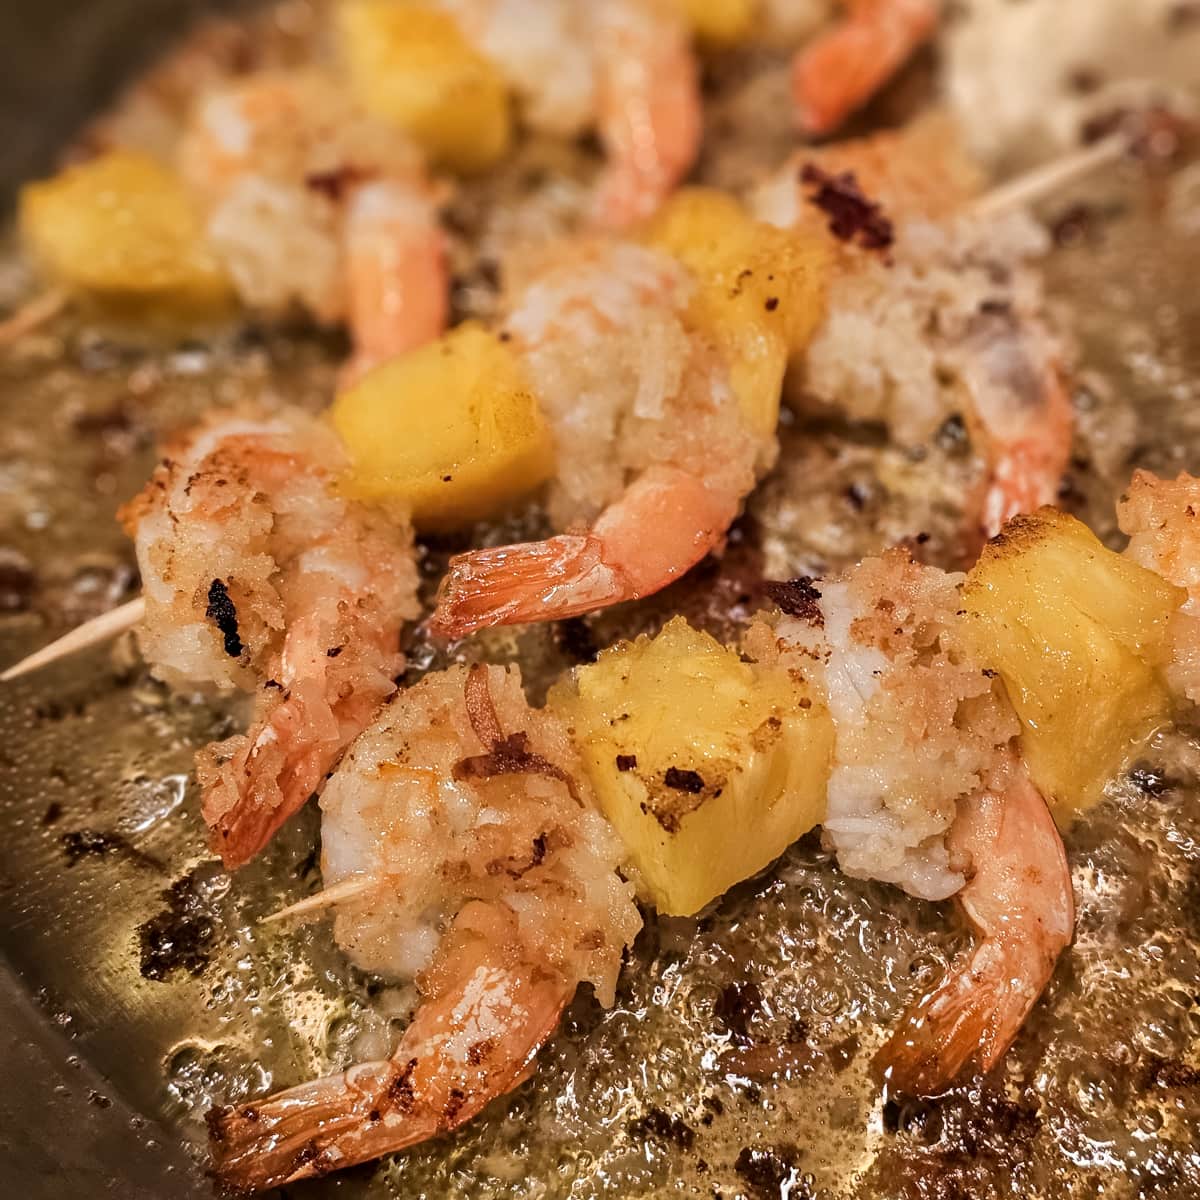 Pina colada style shrimp skewers cooking in a skillet.